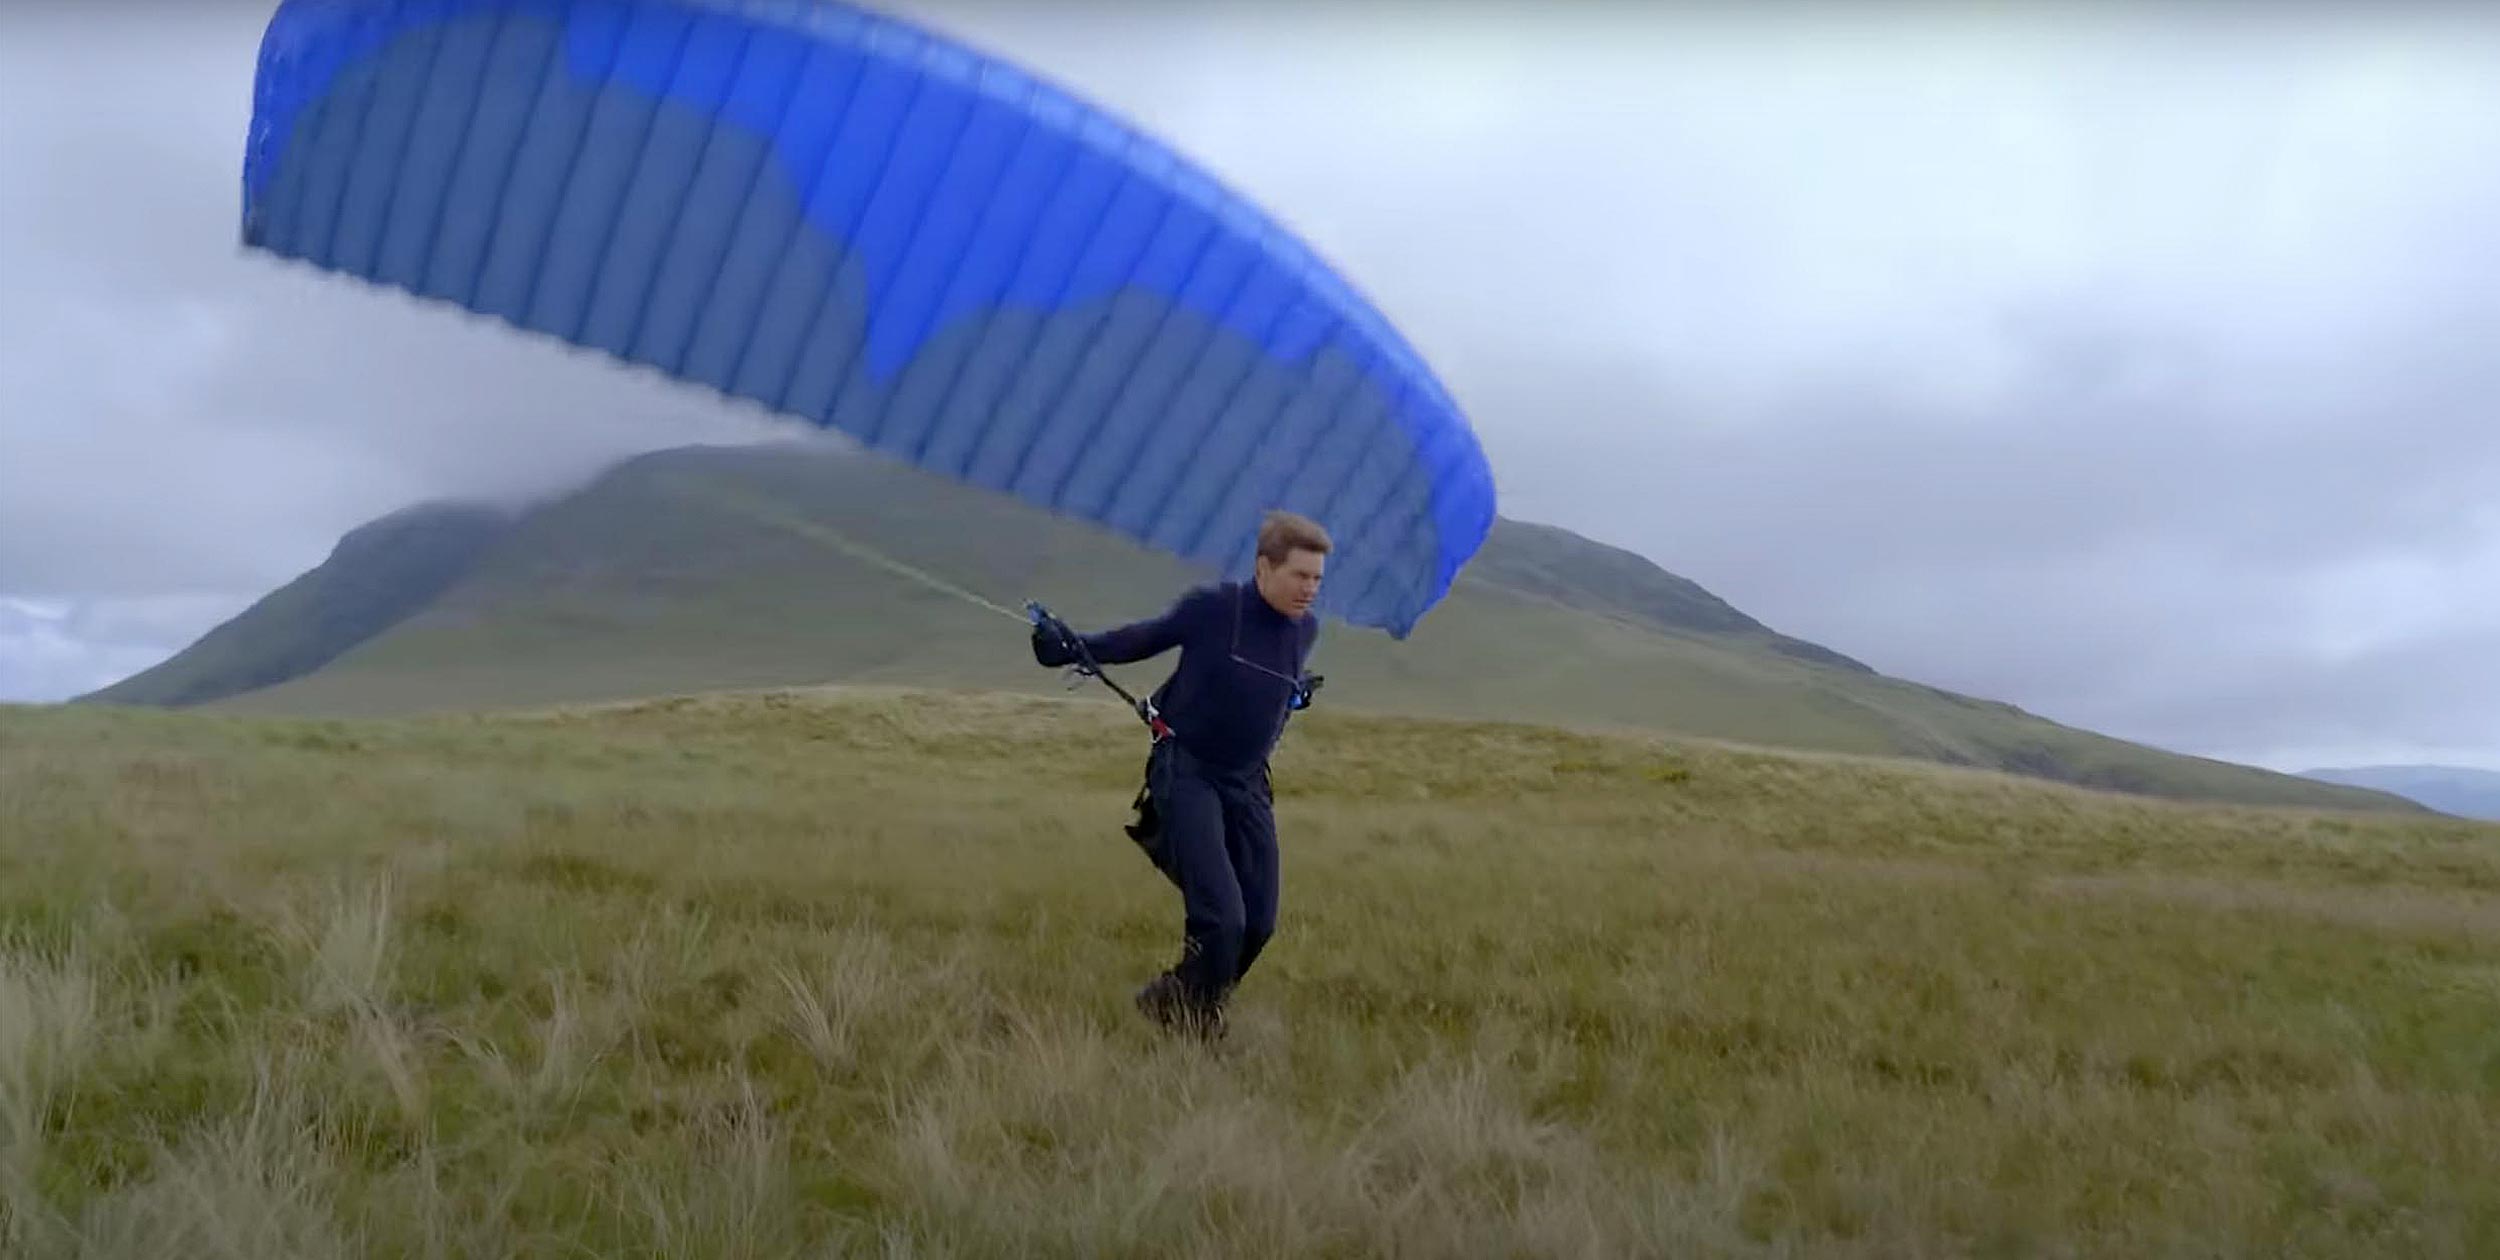 Tom Cruise launches his speed glider in the Lake District for Mission Impossible: Dead Reckoning Part 1. Photo: Mission Impossible